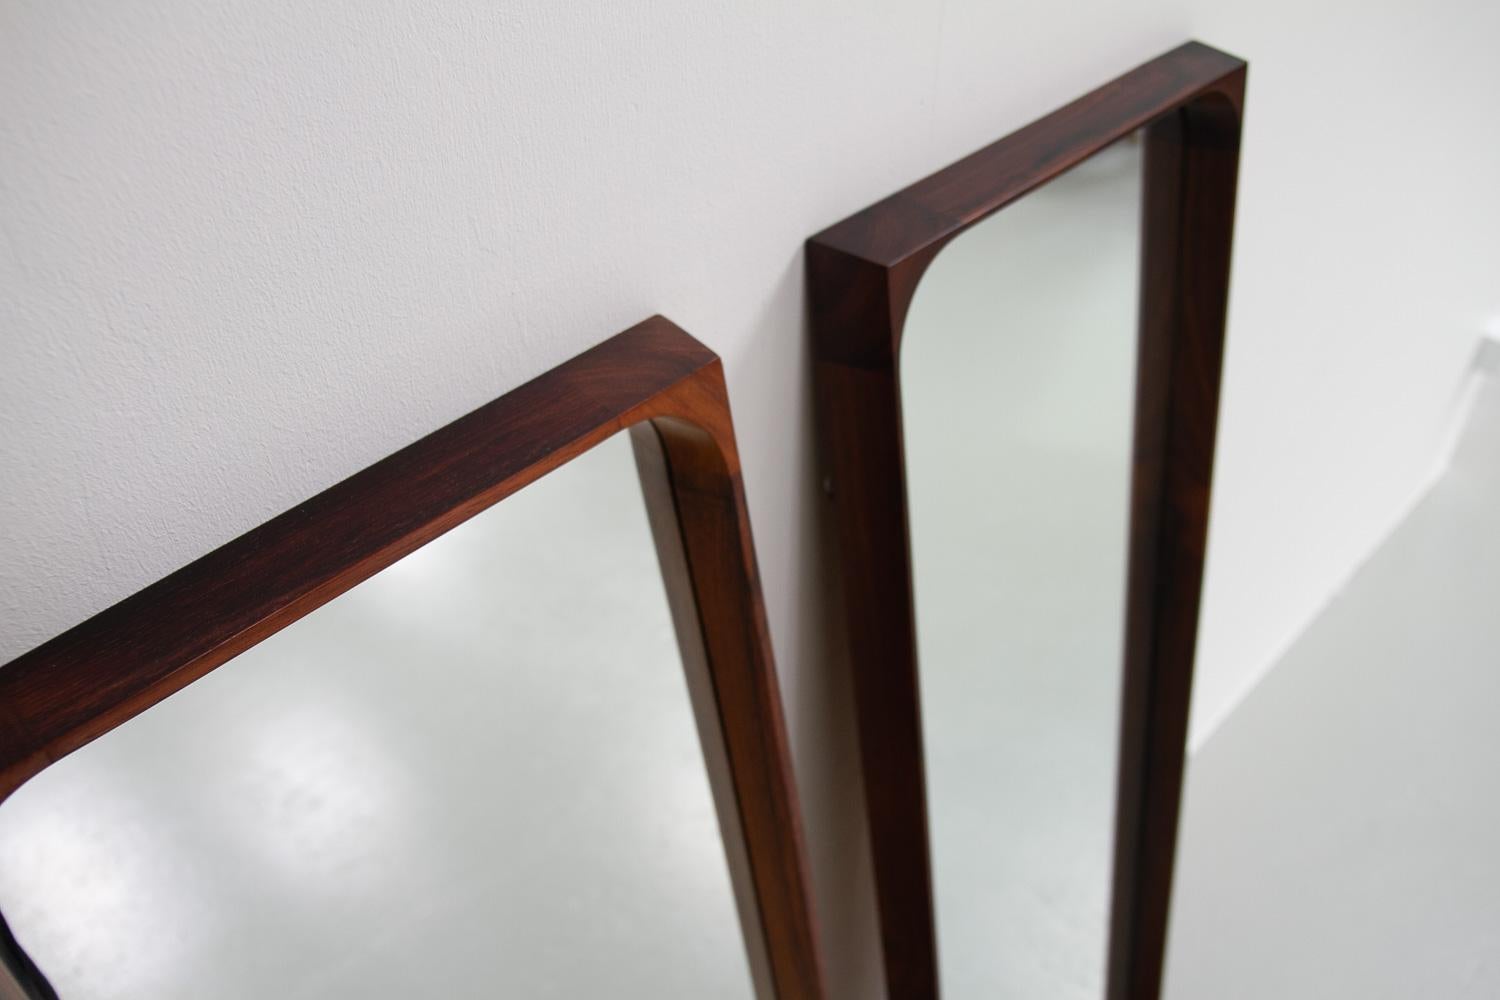 Danish Modern Rosewood Mirrors by Niels Clausen for NC Møbler, 1960s. Set of 2. For Sale 2